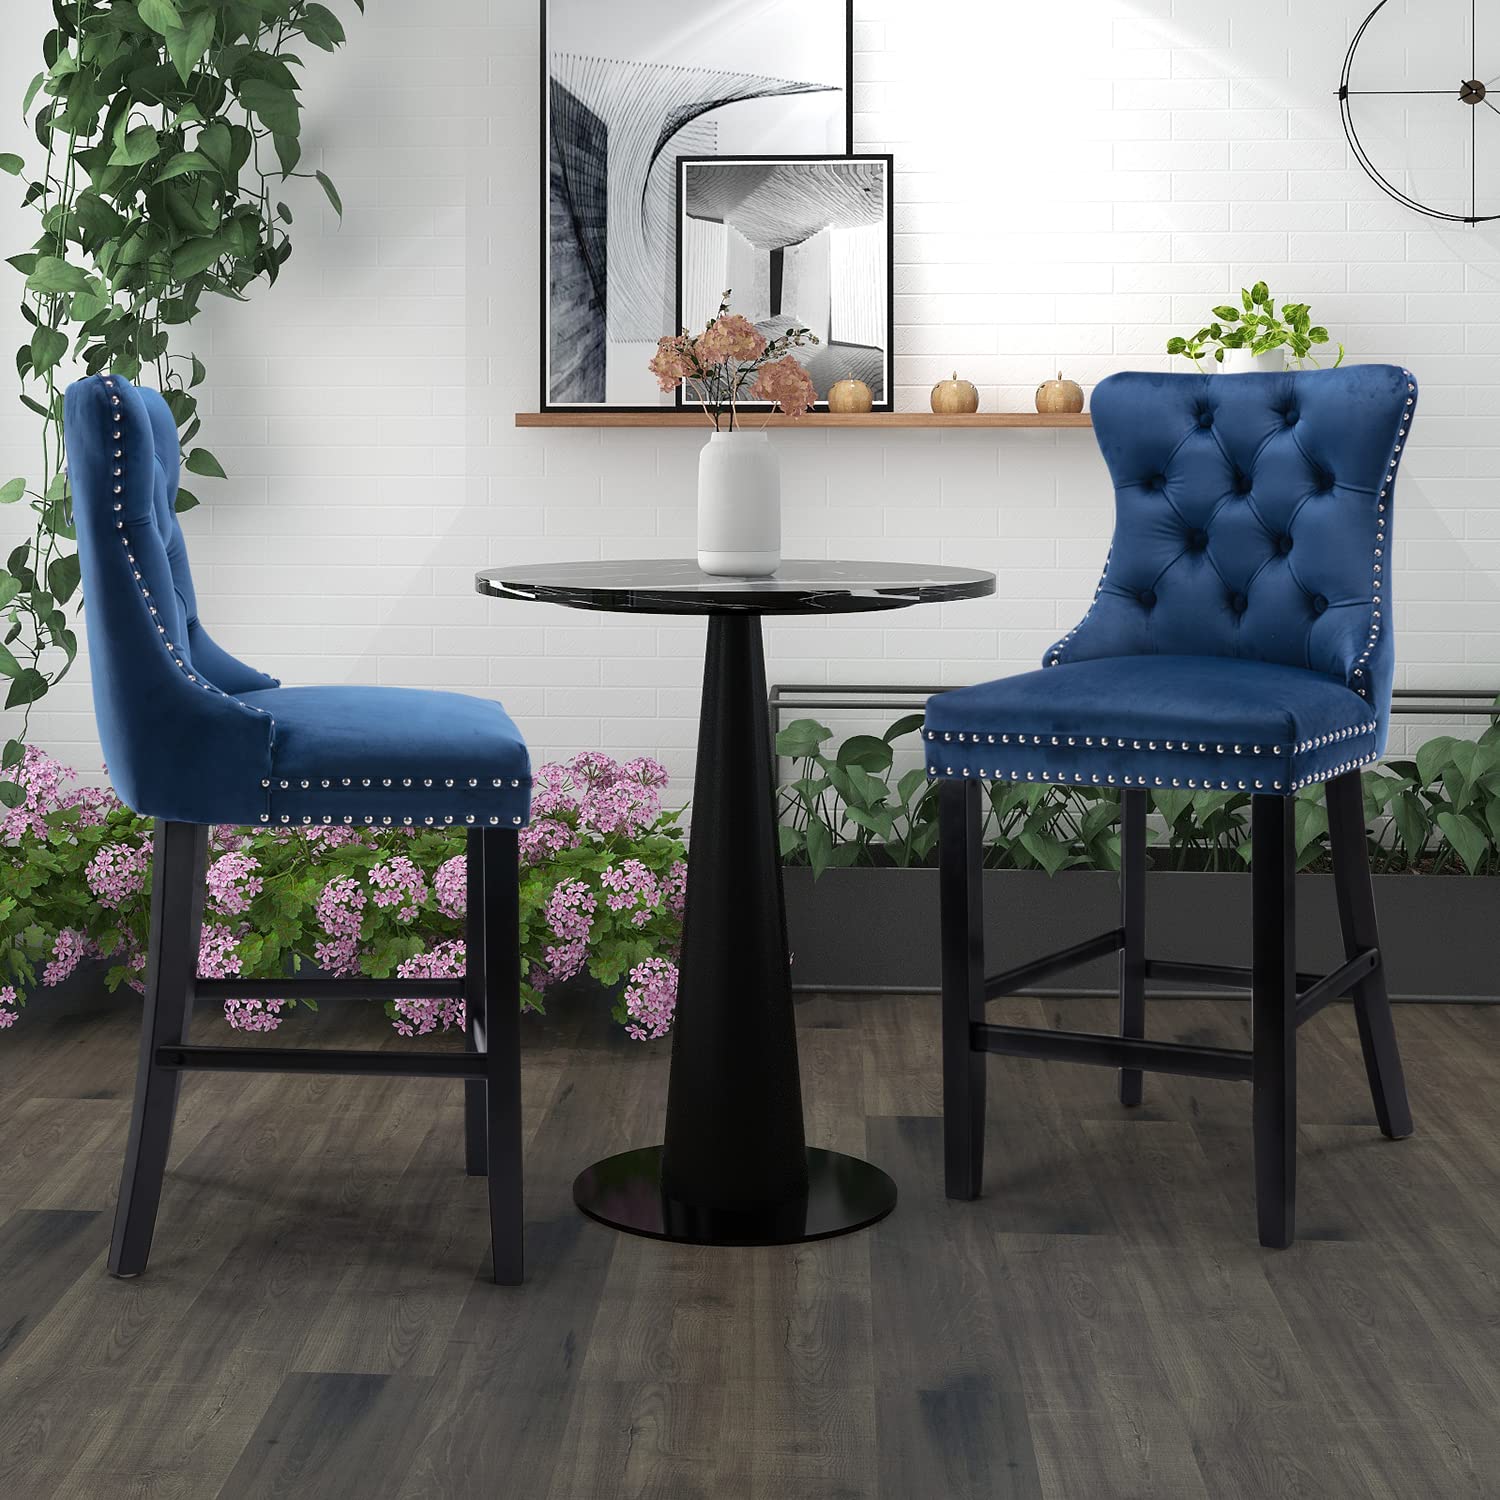 2X Velvet Bar Stools with Studs Trim Wooden Legs Tufted Dining Chairs Kitchen - image10